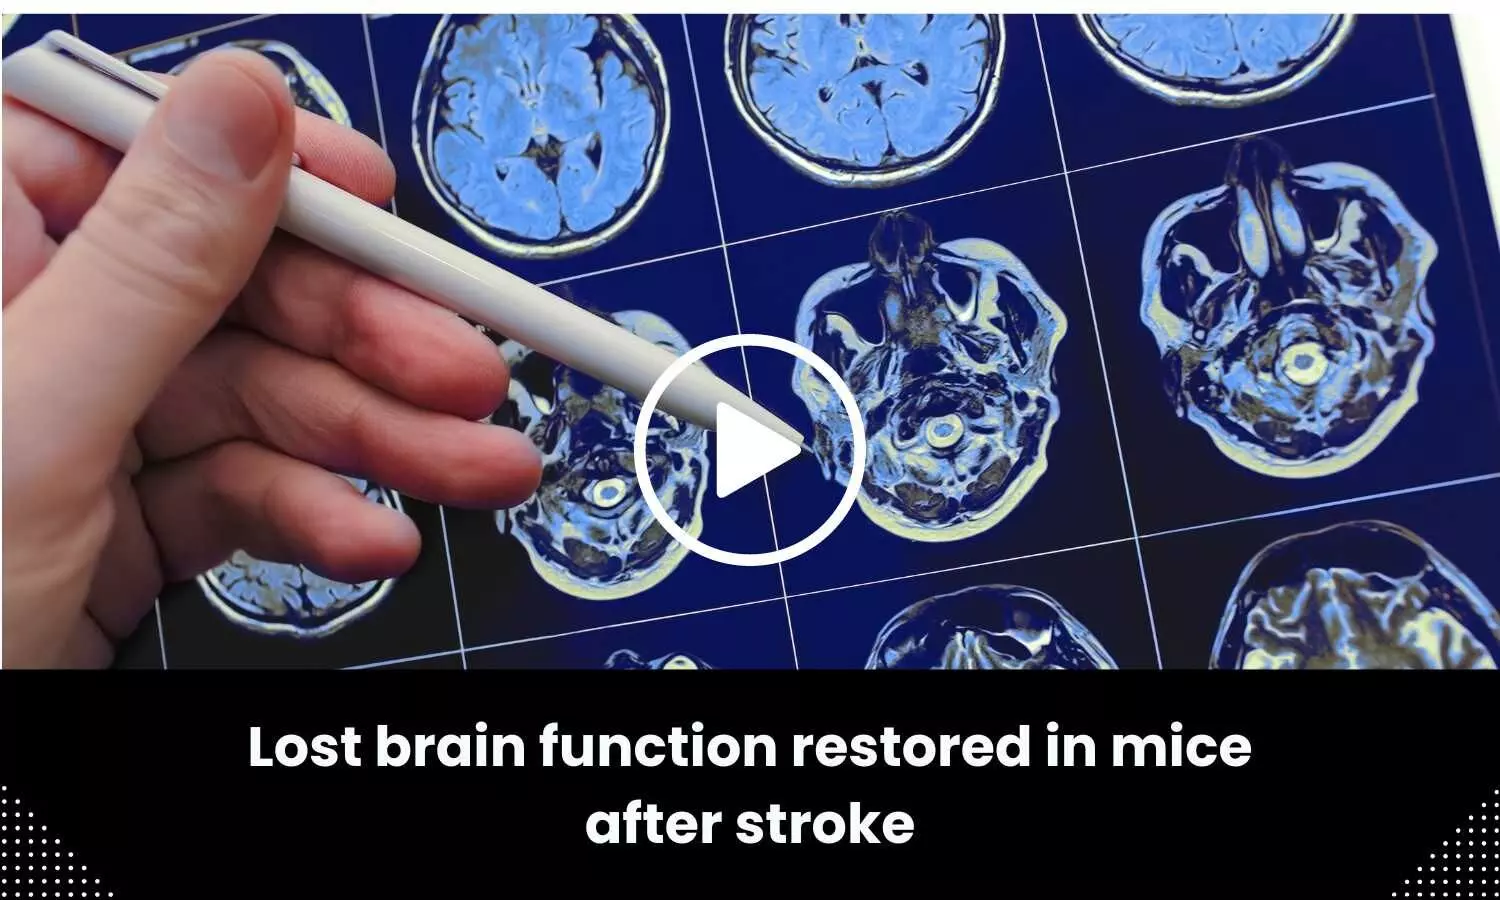 Lost brain function restored after stroke, finds study